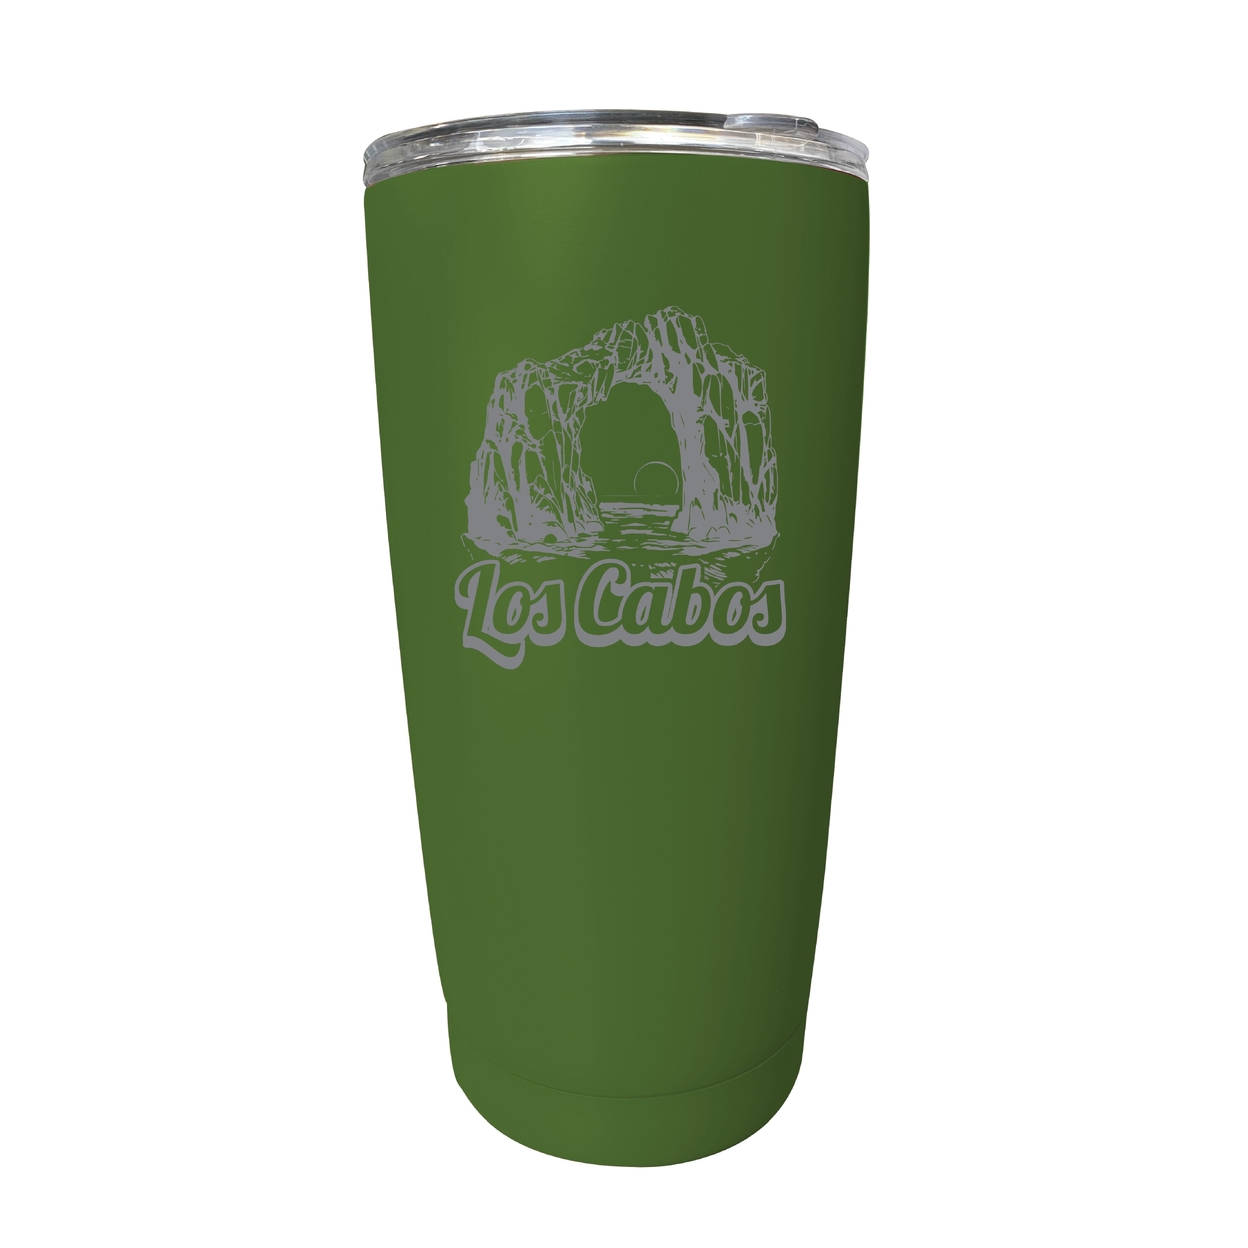 Los Cabos Mexico Souvenir 16 Oz Engraved Stainless Steel Insulated Tumbler - Green,,2-Pack